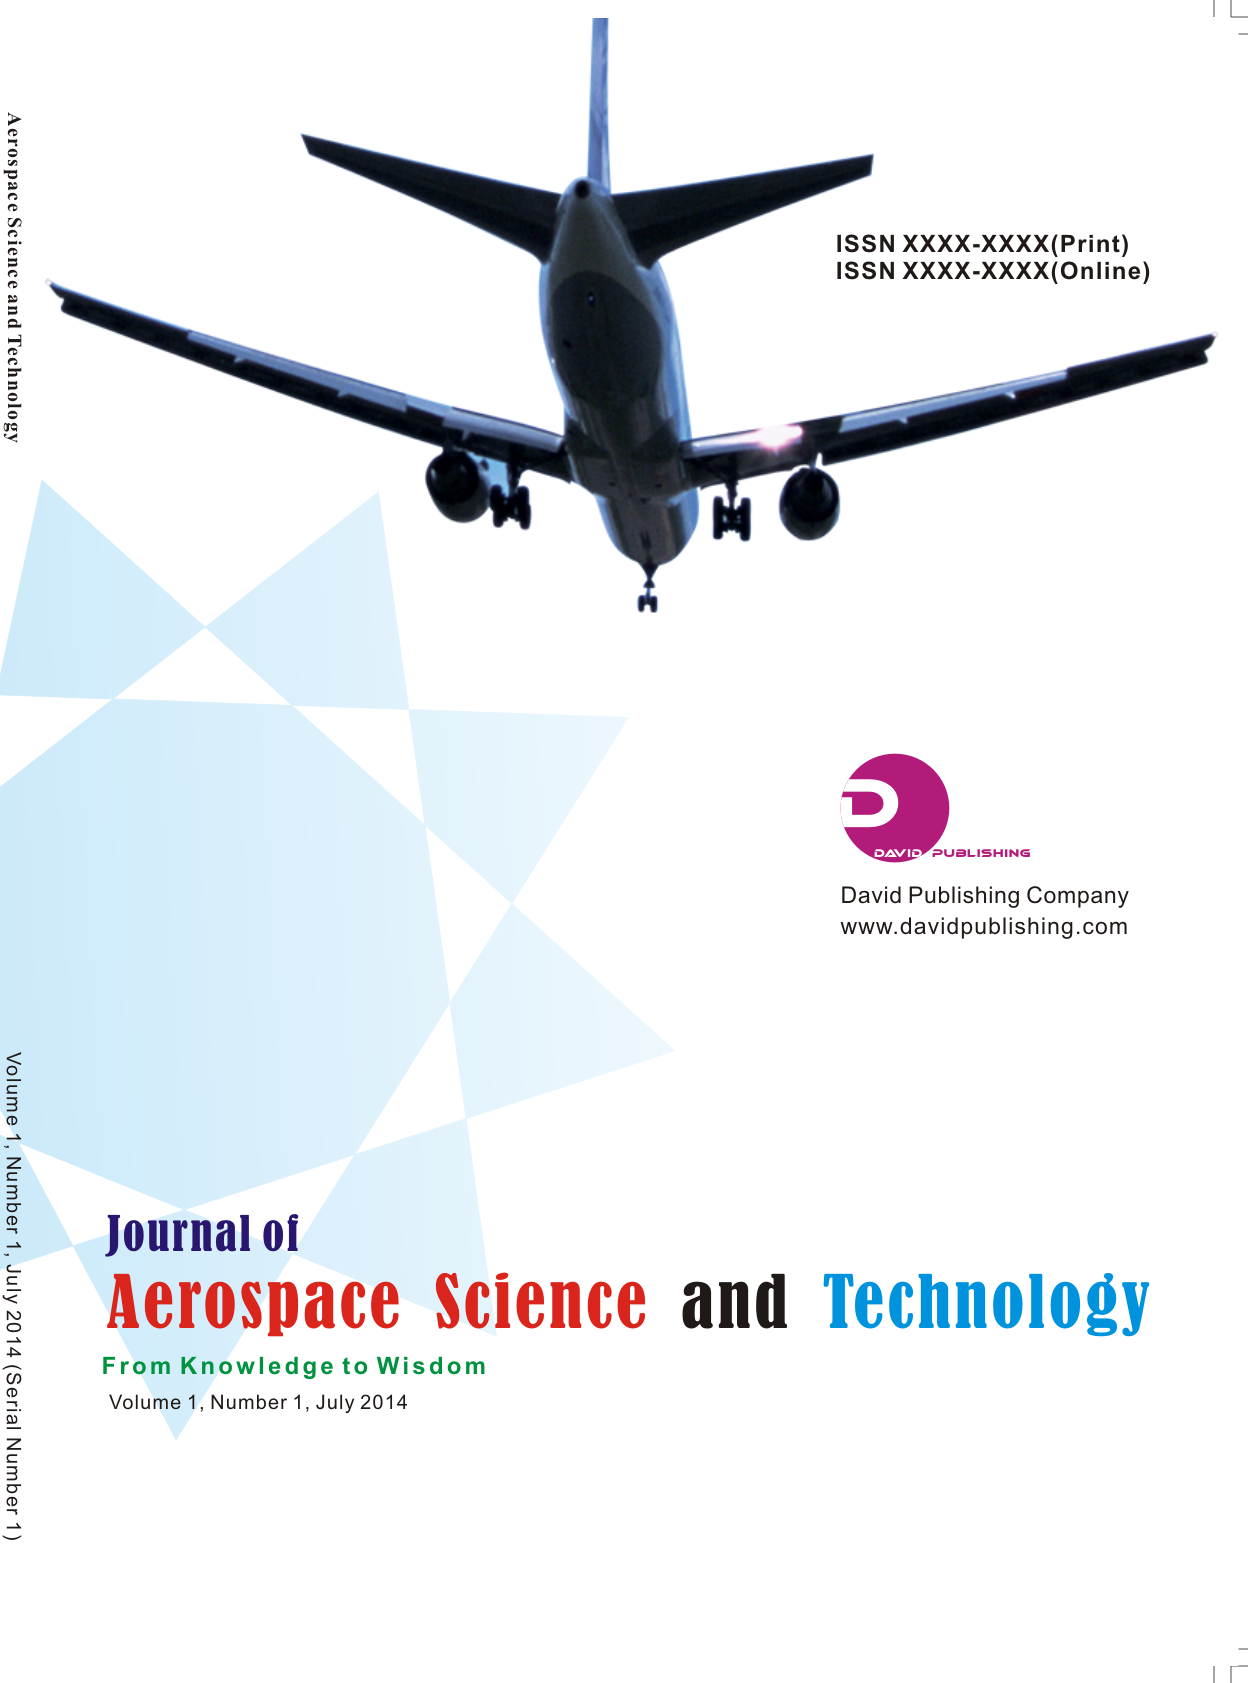 Journal of Aerospace Science and Technology